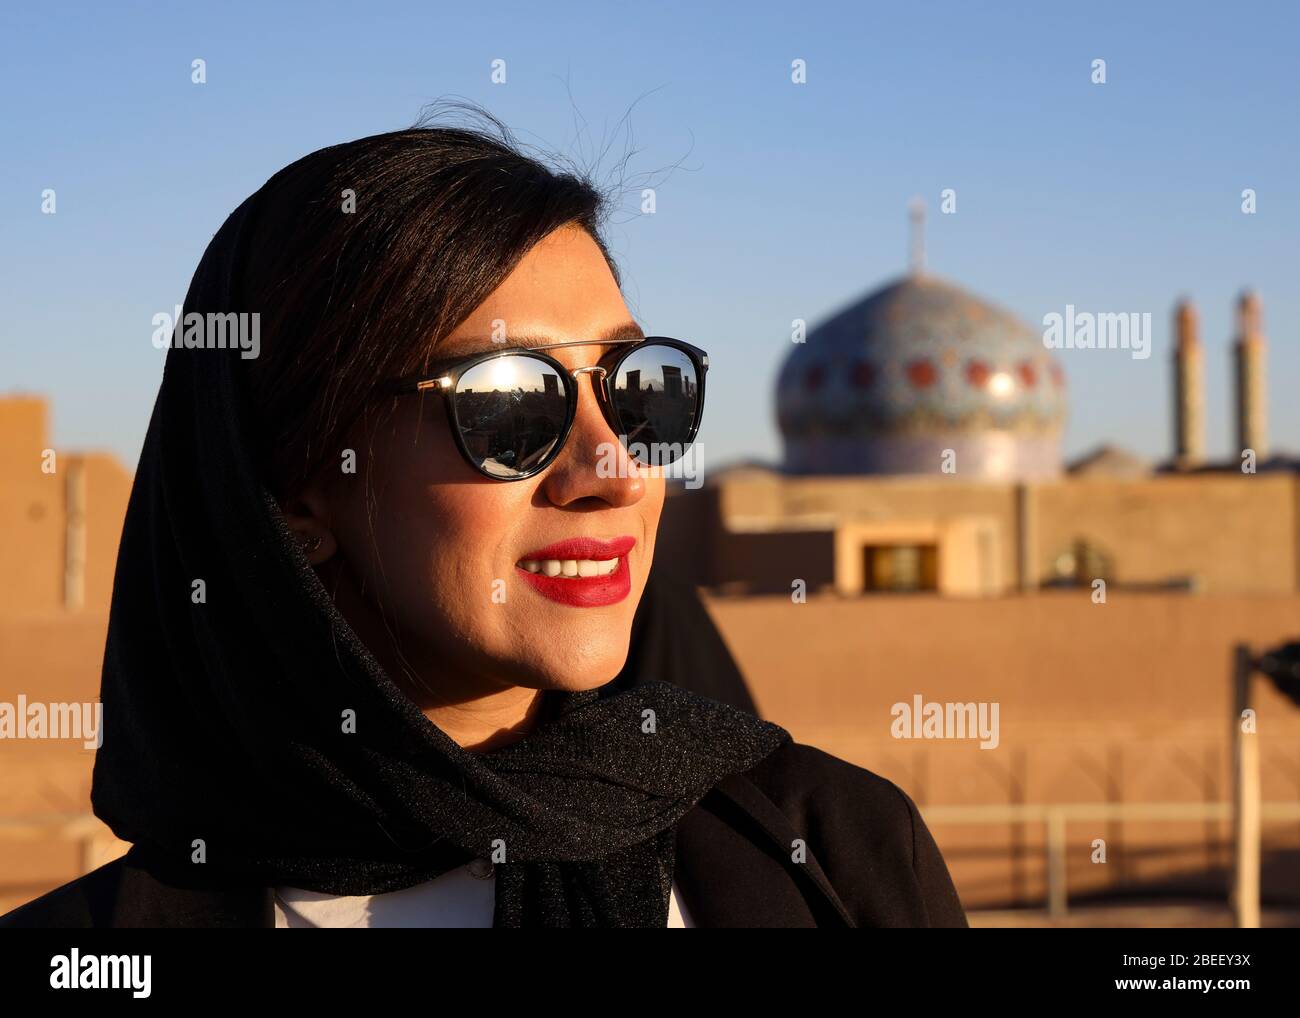 Portrait of a young woman wearing sunglasses in Yazd, Iran, Persia, Middle East. Stock Photo